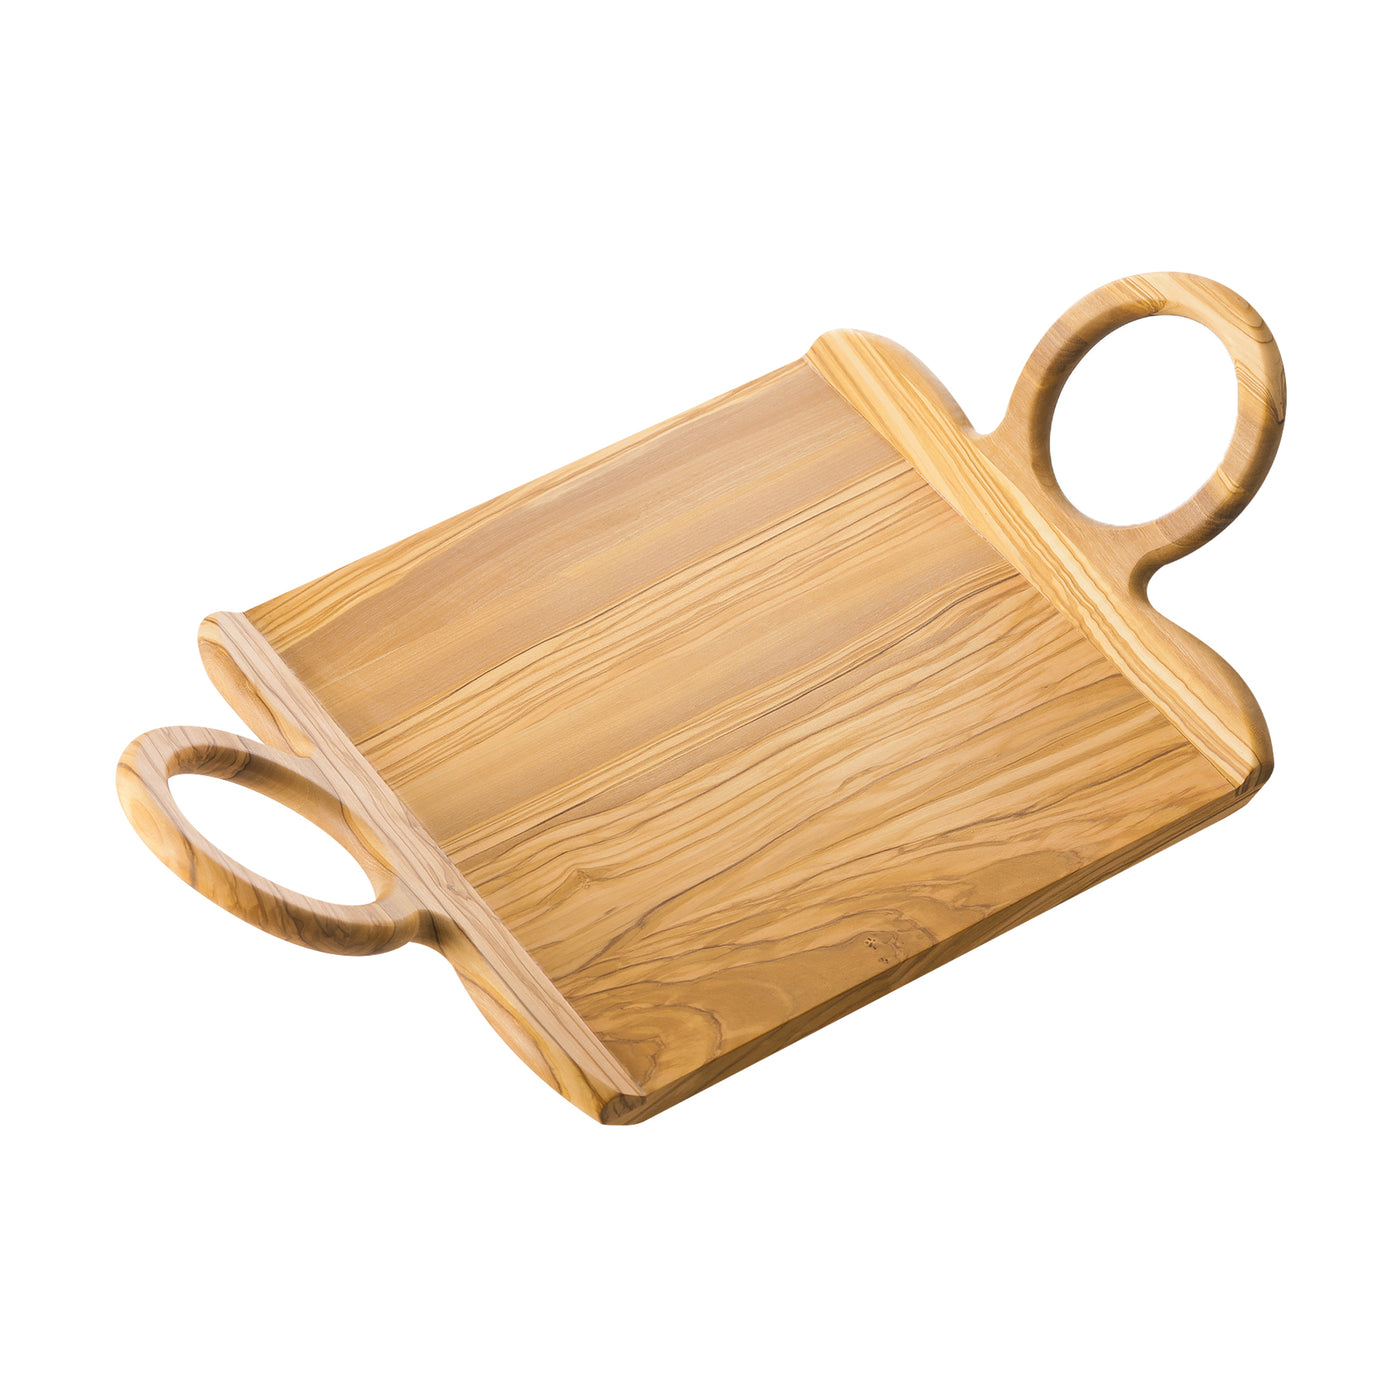 Ring Handle Serving Trays with Handles